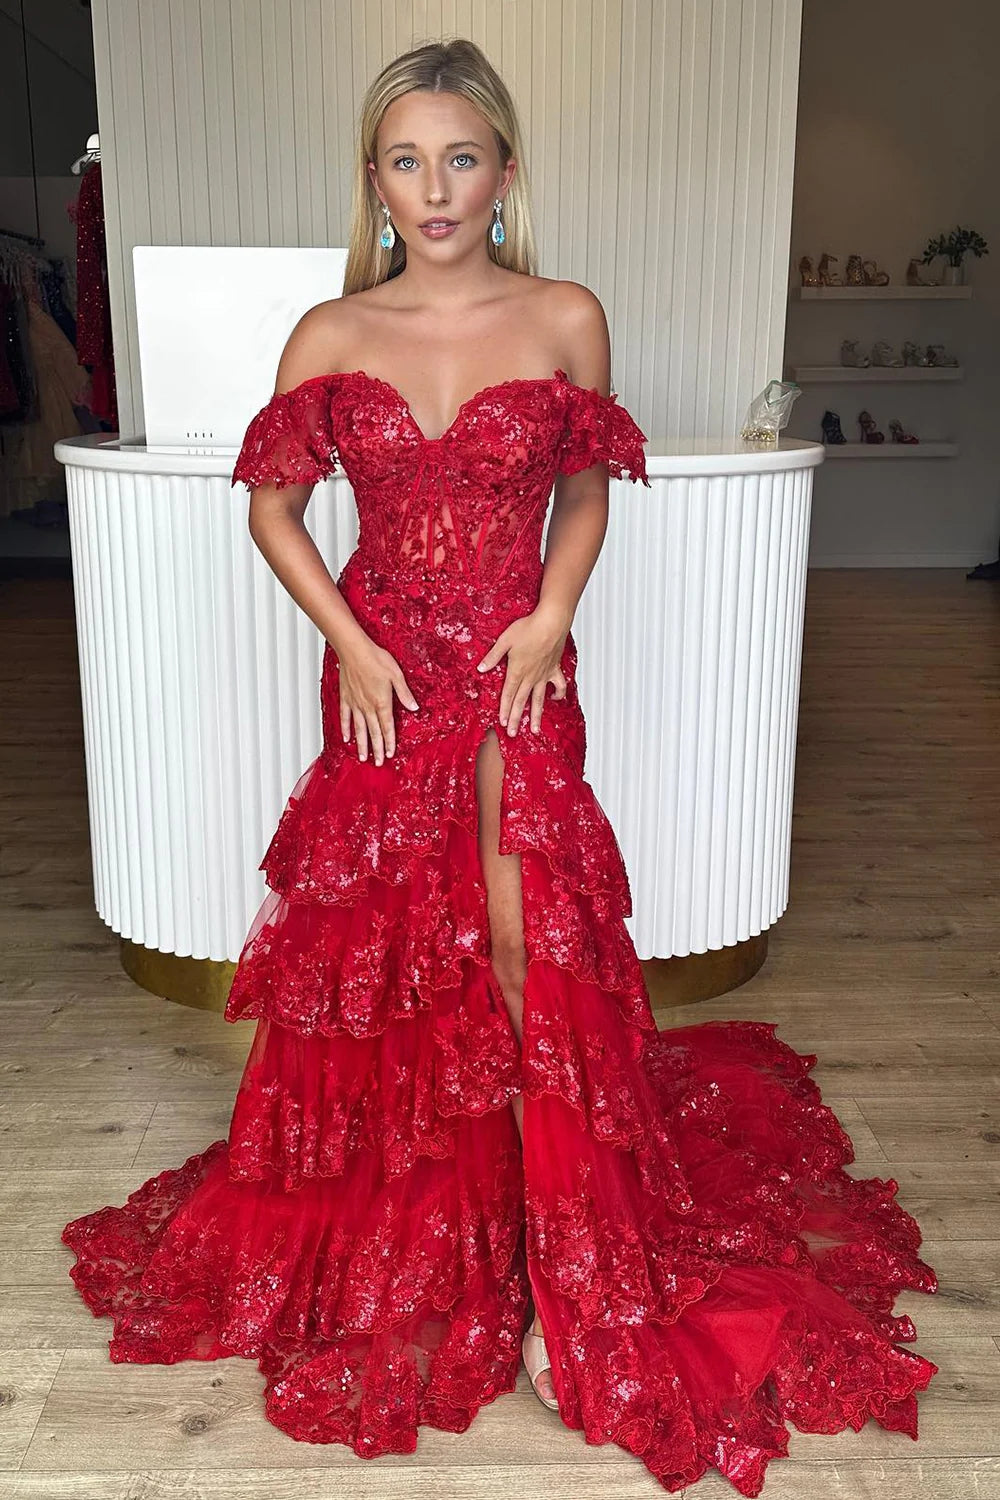 Red Tulle Short A-Line Prom Dress, Cute Red Evening Party Dress US 6 / Custom Color